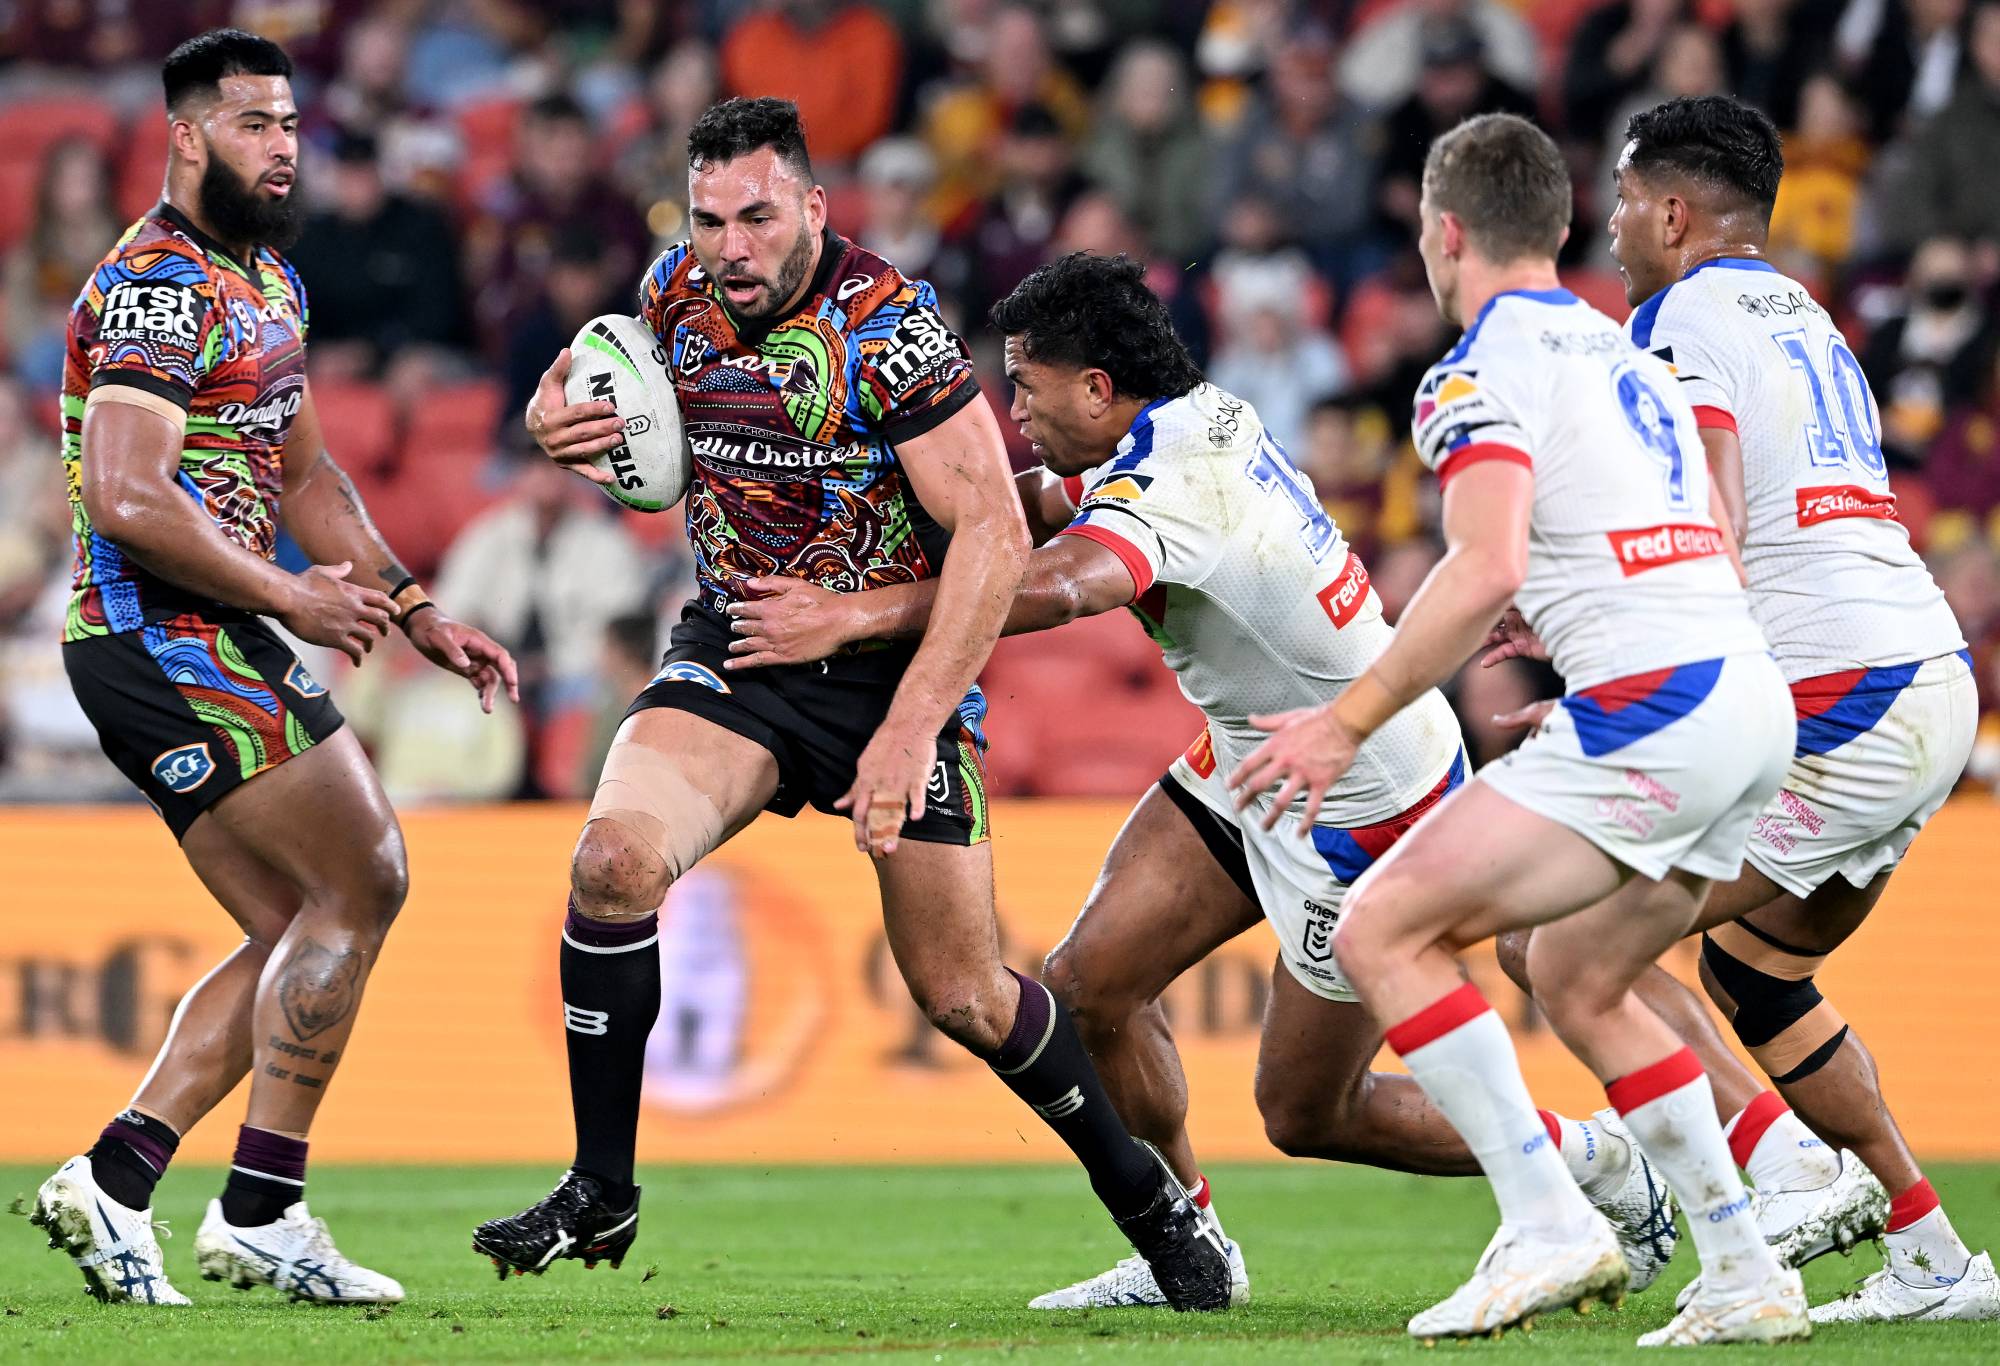 BRISBANE, AUSTRALIA - AUGUST 13: Ryan James of the Broncos tries to break through the defense during the NRL Round 22 game between the Brisbane Broncos and Newcastle Knights at Suncorp Stadium on August 13, 2022, in Brisbane, Australia.  (Photo by Bradley Kanaris/Getty Images)